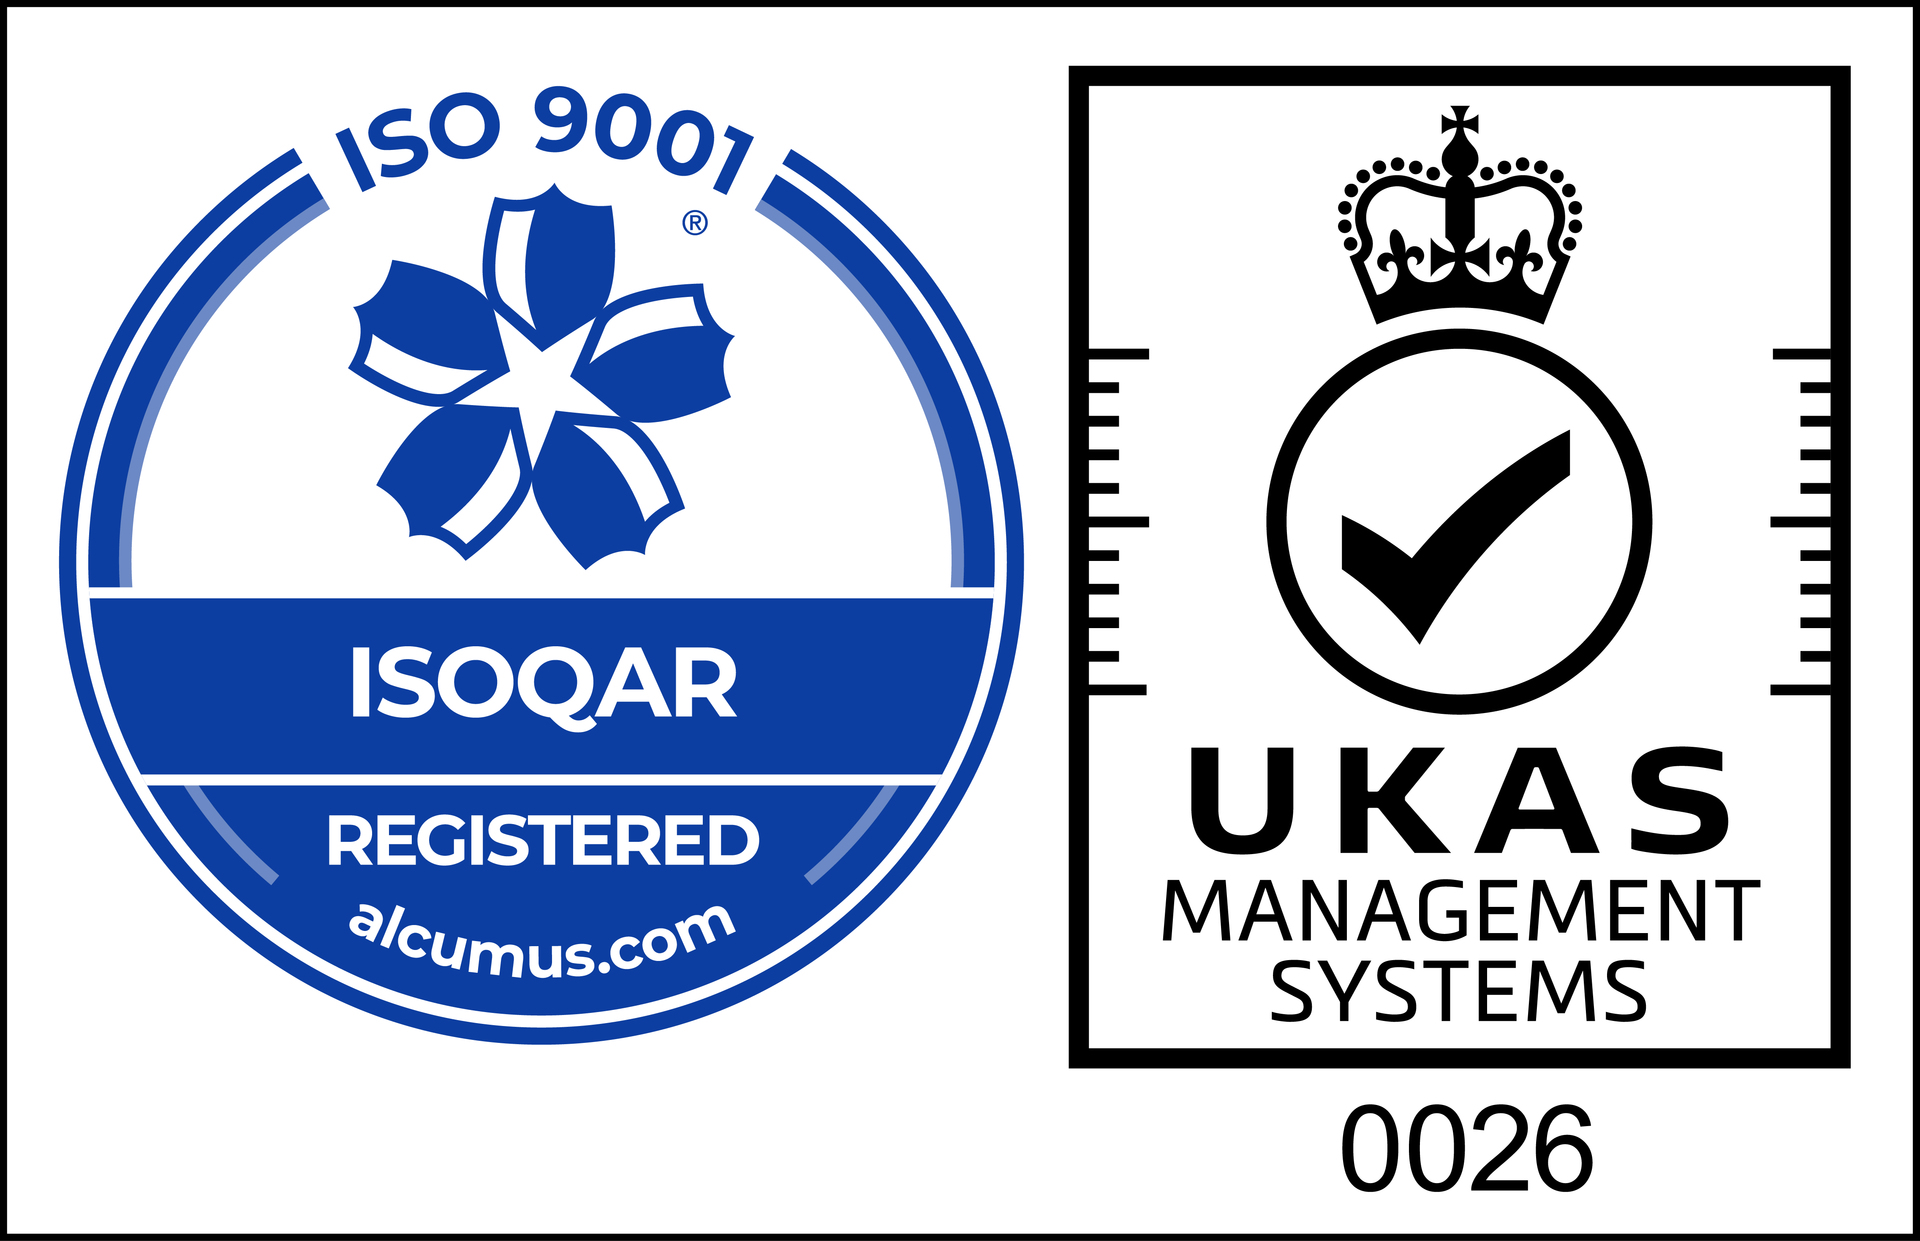 Etch Tech are registered to ISO 9001 Standard, assuring quality management for etched metal products